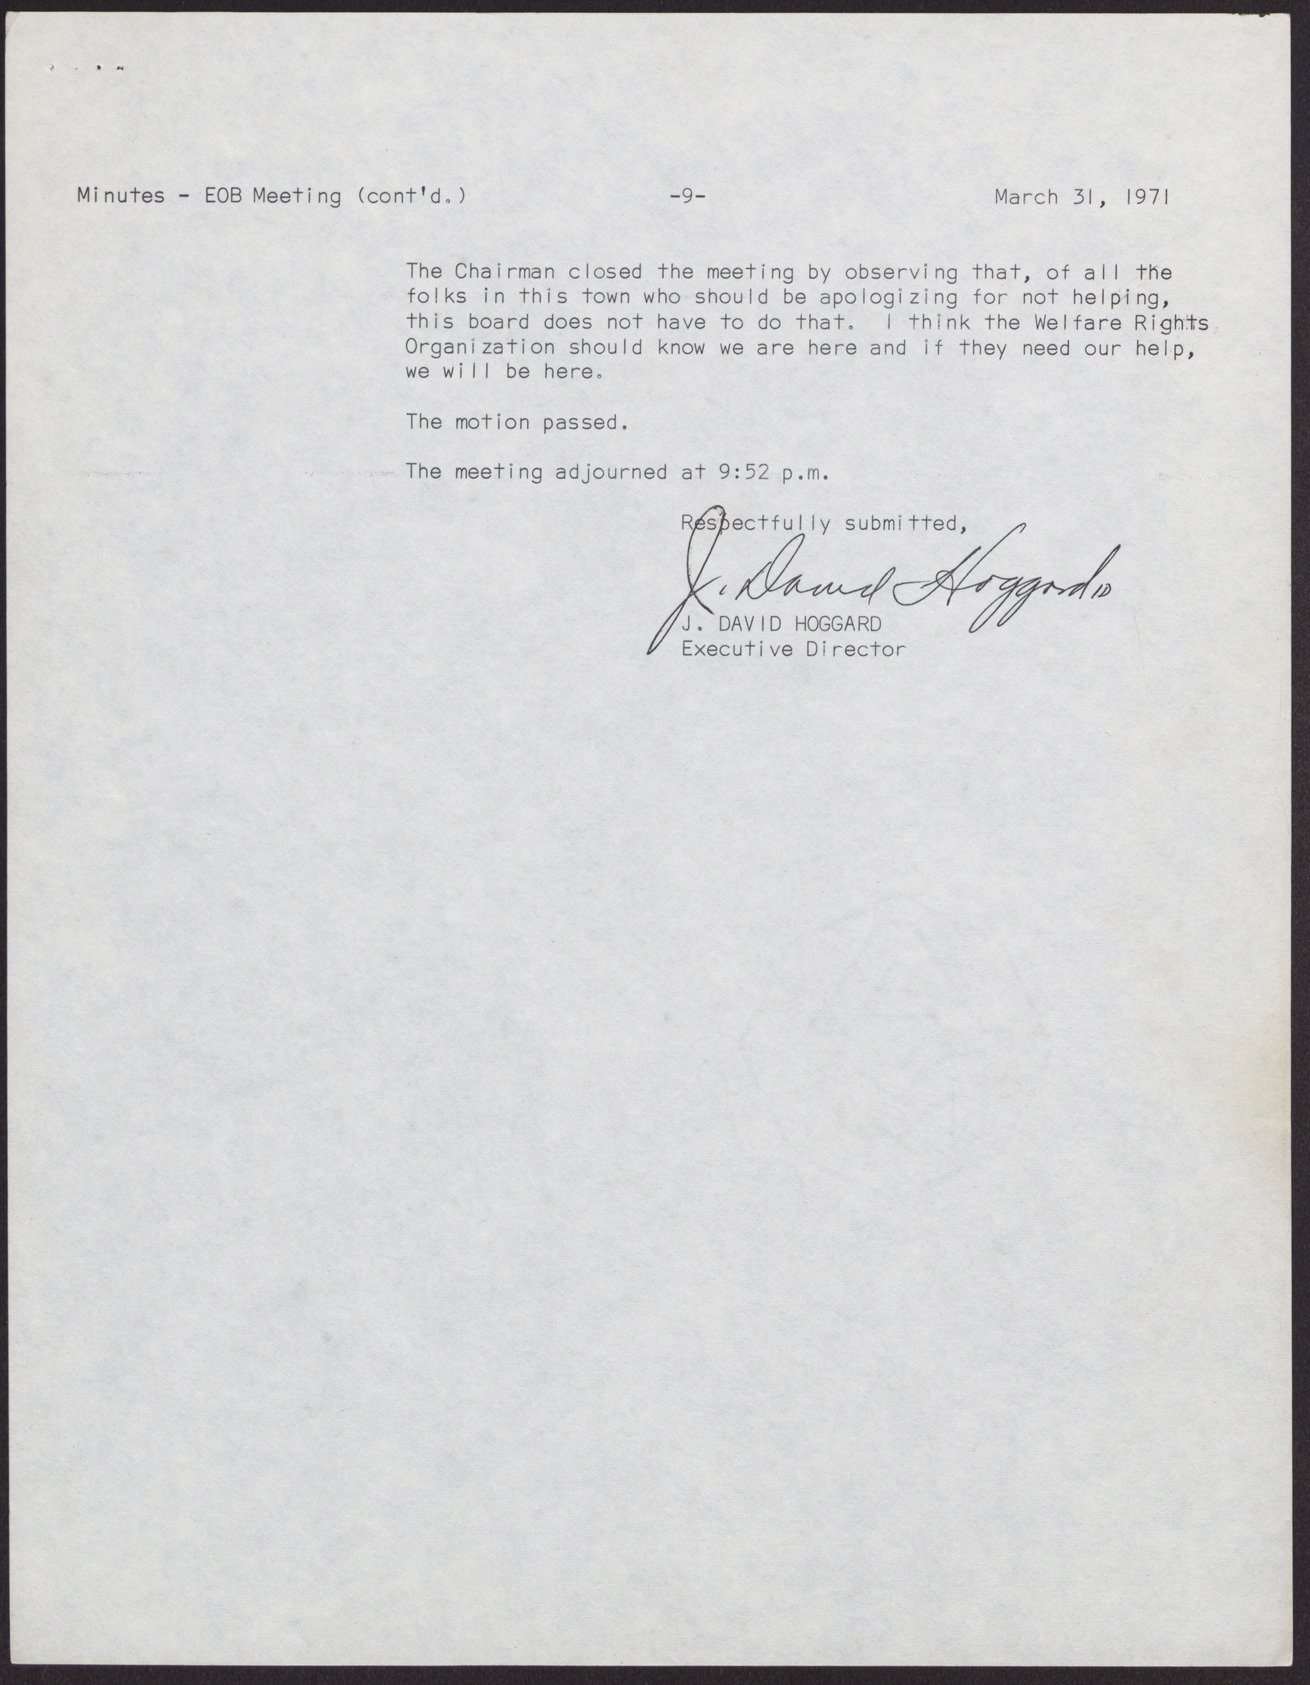 Minutes from Economic Opportunity Board meeting (9 pages), March 31, 1971, page 9